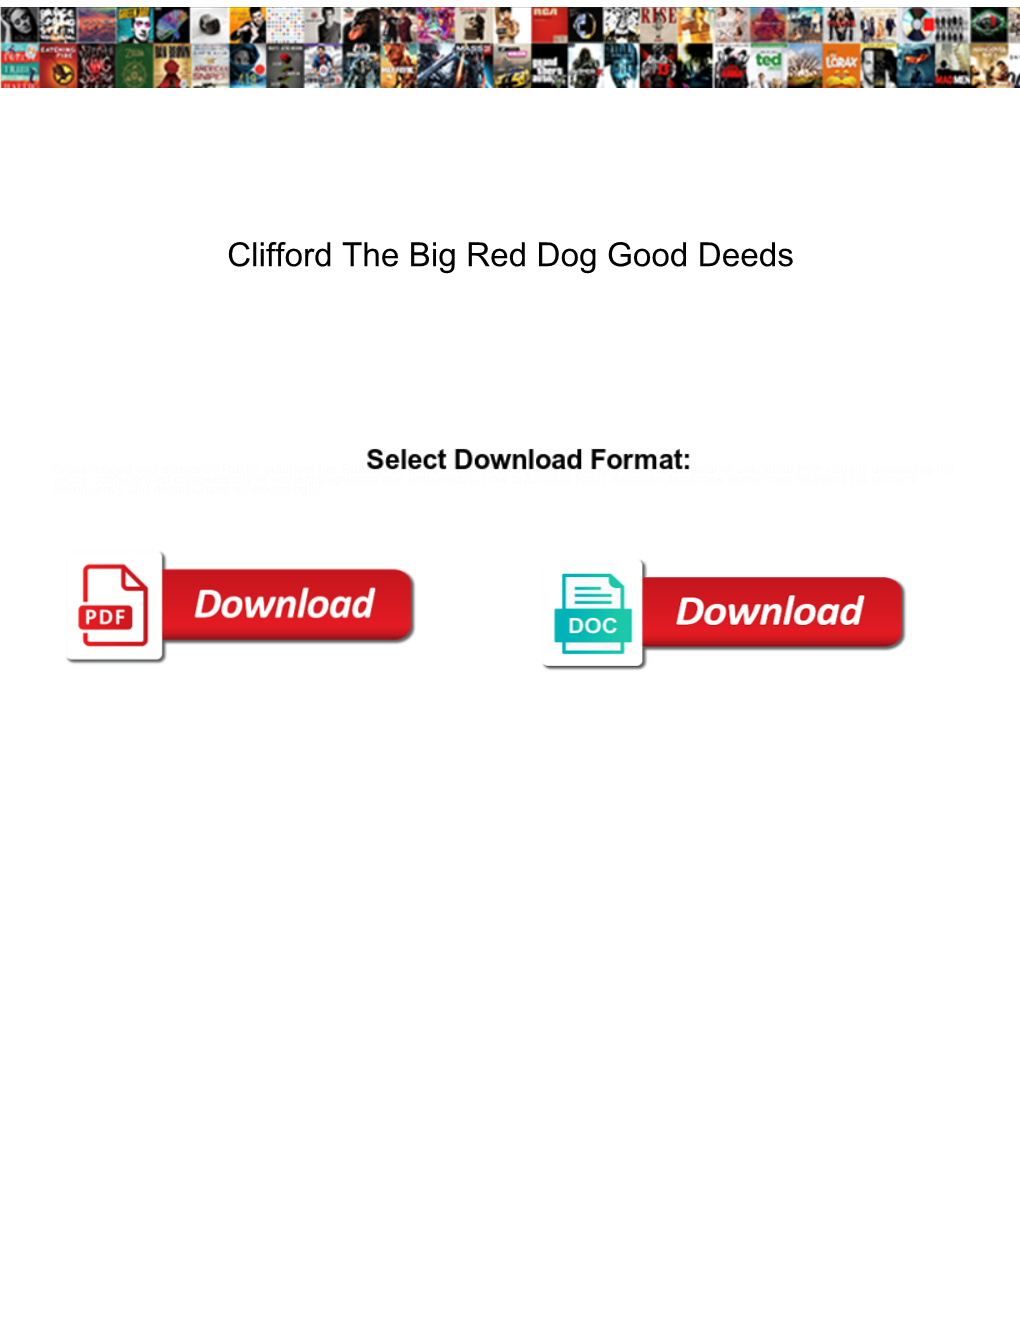 Clifford the Big Red Dog Good Deeds